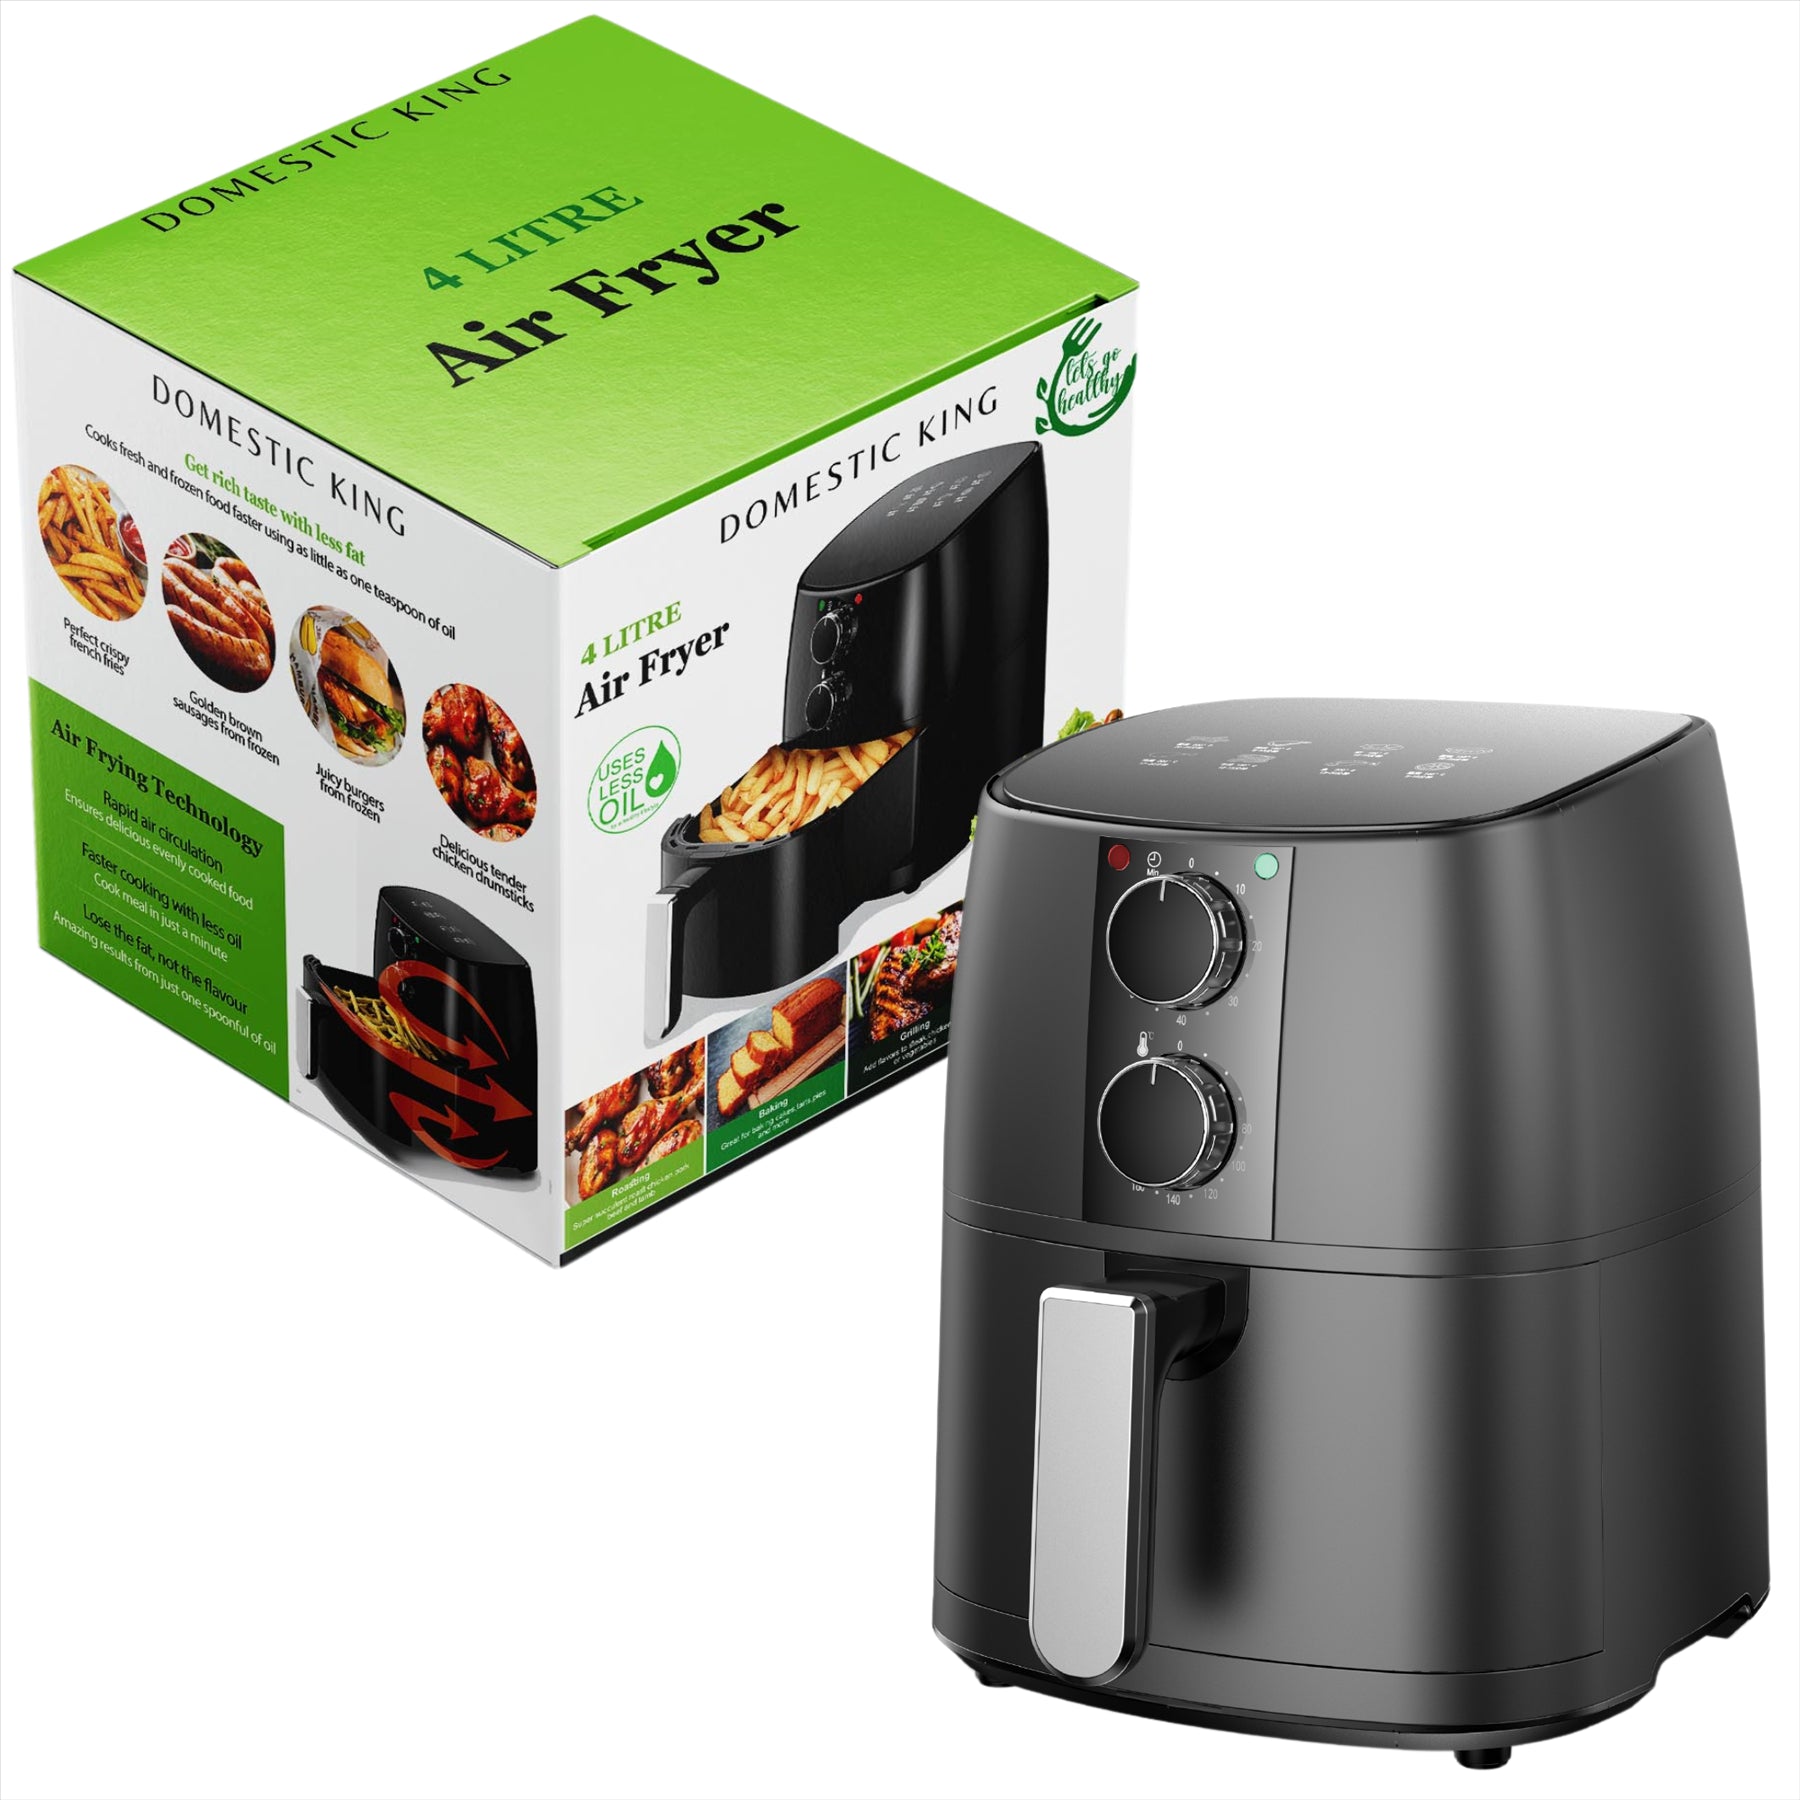 Domestic King 4L Air Fryer With Timer & Temperature Control